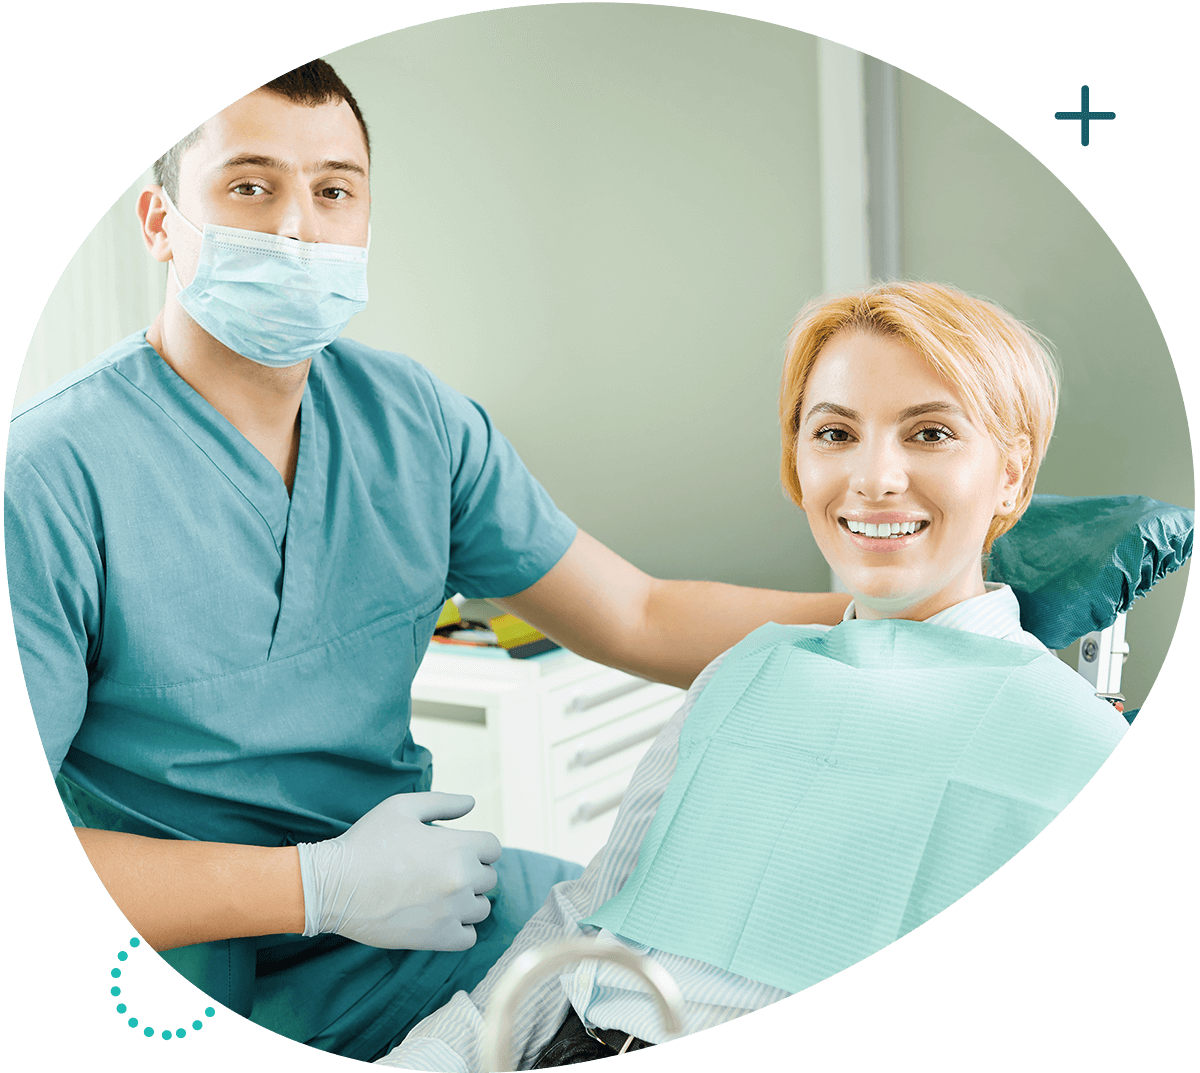 https://aridentistry.ca/wp-content/uploads/2020/01/home-service-1-1.png